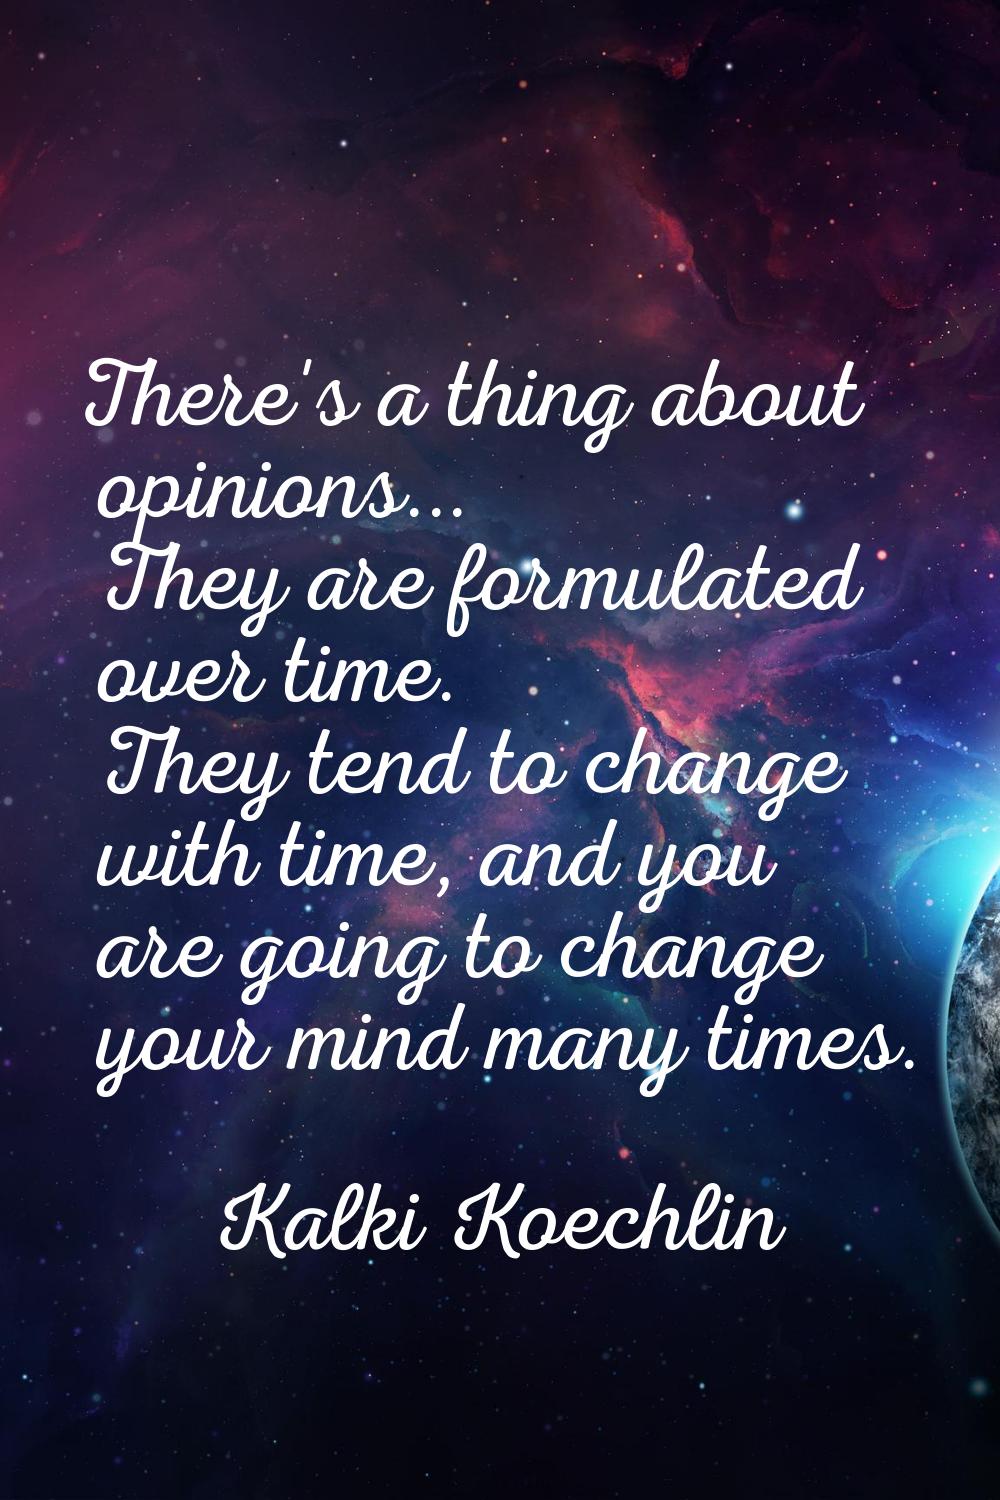 There's a thing about opinions... They are formulated over time. They tend to change with time, and